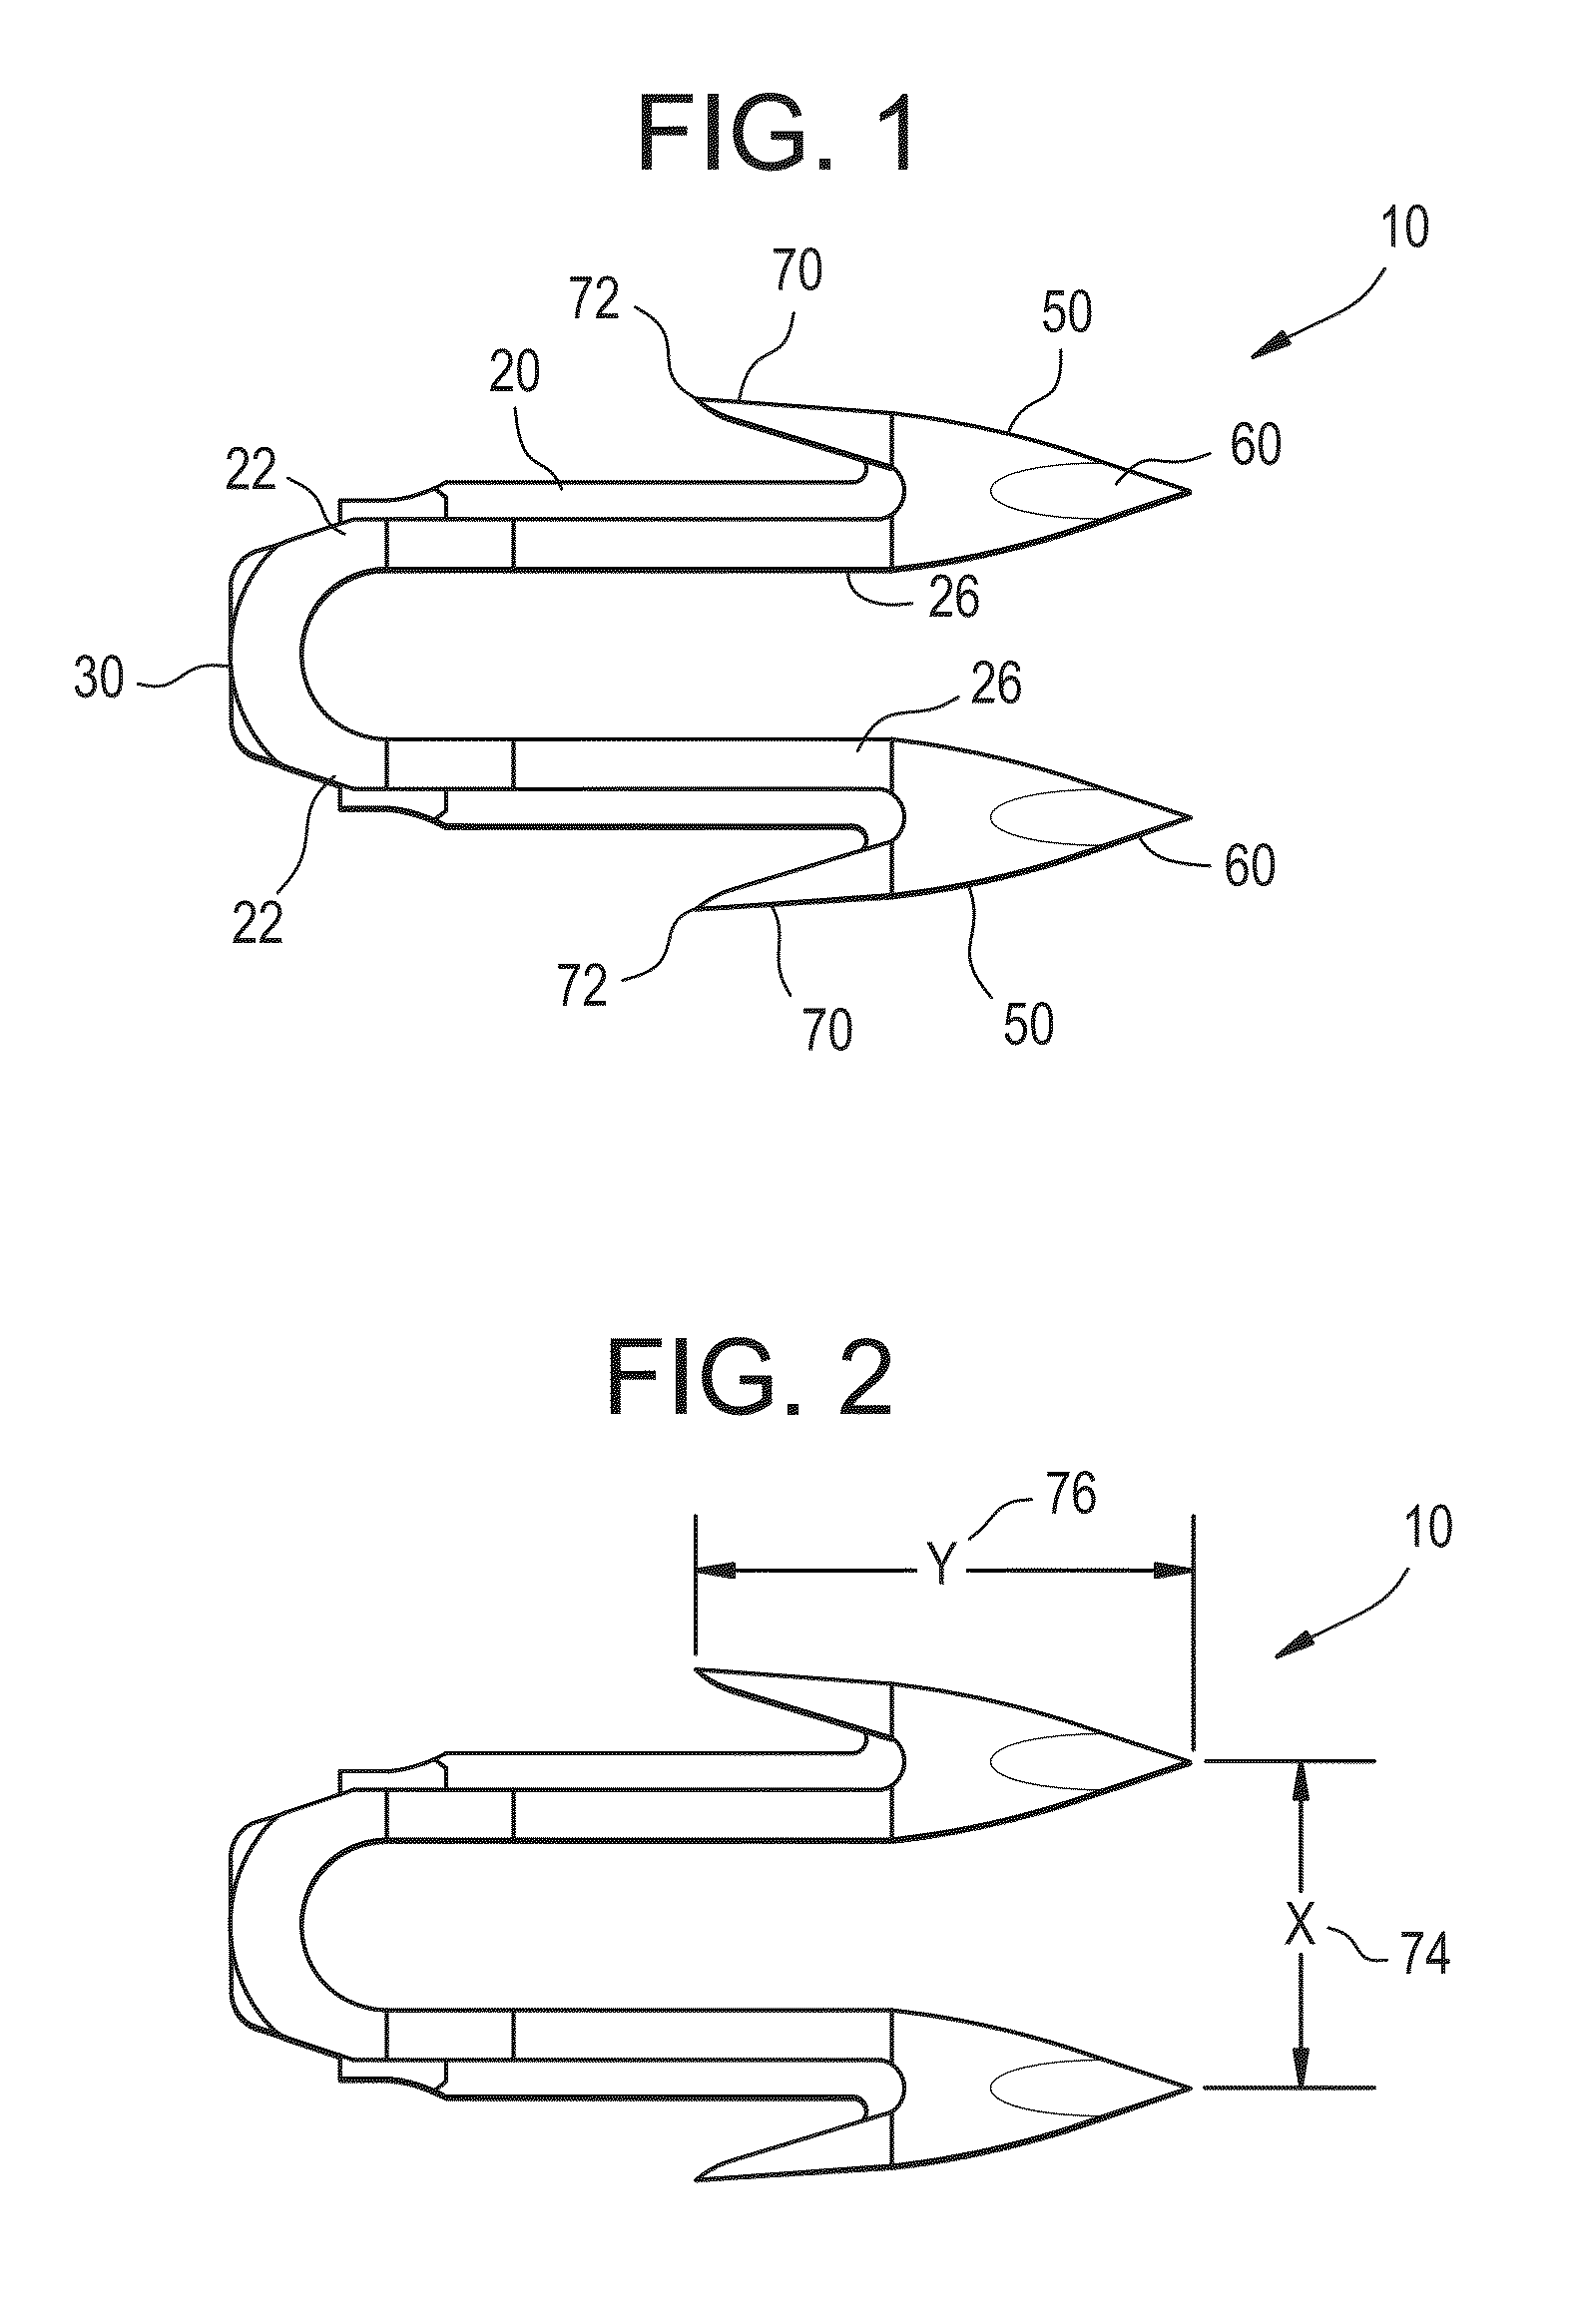 Absorbable polymeric blend compositions based on copolymers prepared from mono- and di-functional polymerization initiators, processing methods, and medical devices therefrom